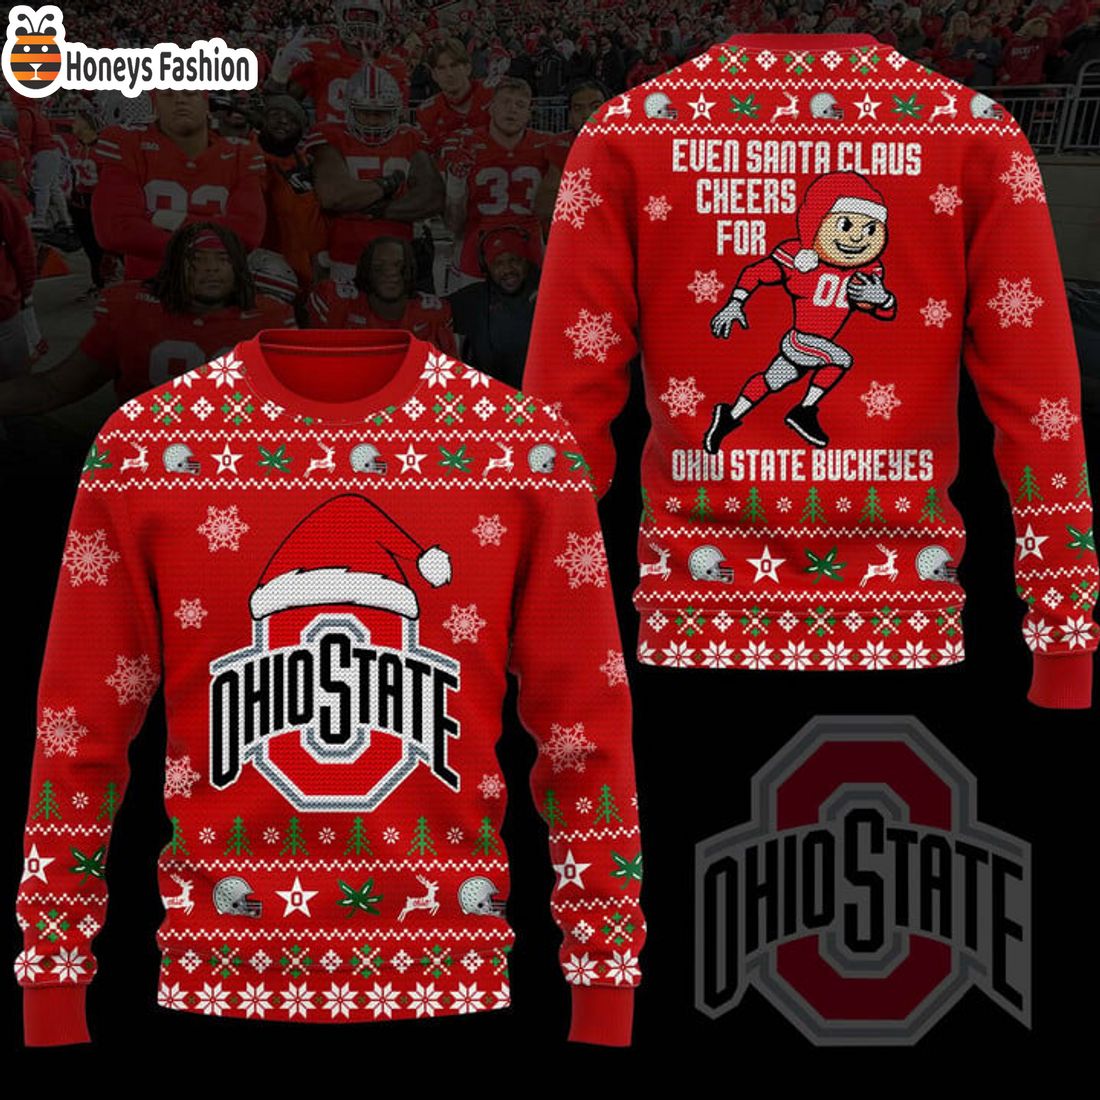 HOT Ohio State Buckeyes Even Santa Claus Cheers Ugly Christmas Sweater